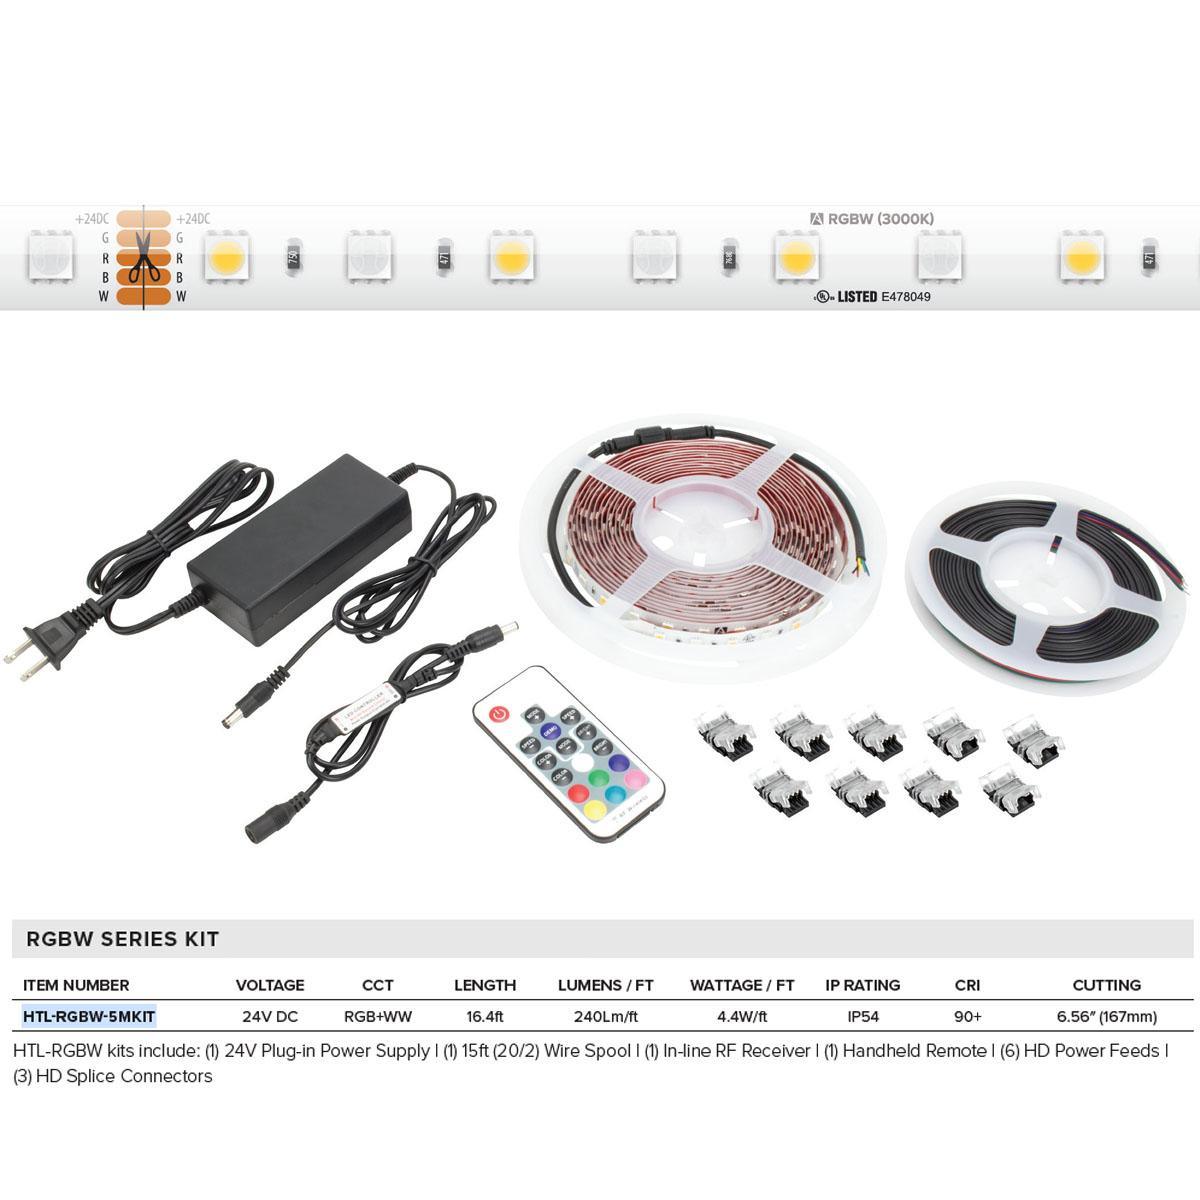 Trulux High Output LED Strip Light Kit with Remote control, 16.4Ft Reel with 24V DC Kit with Plug and Play Connection, RGB + 3000K, 240 Lumens per Ft